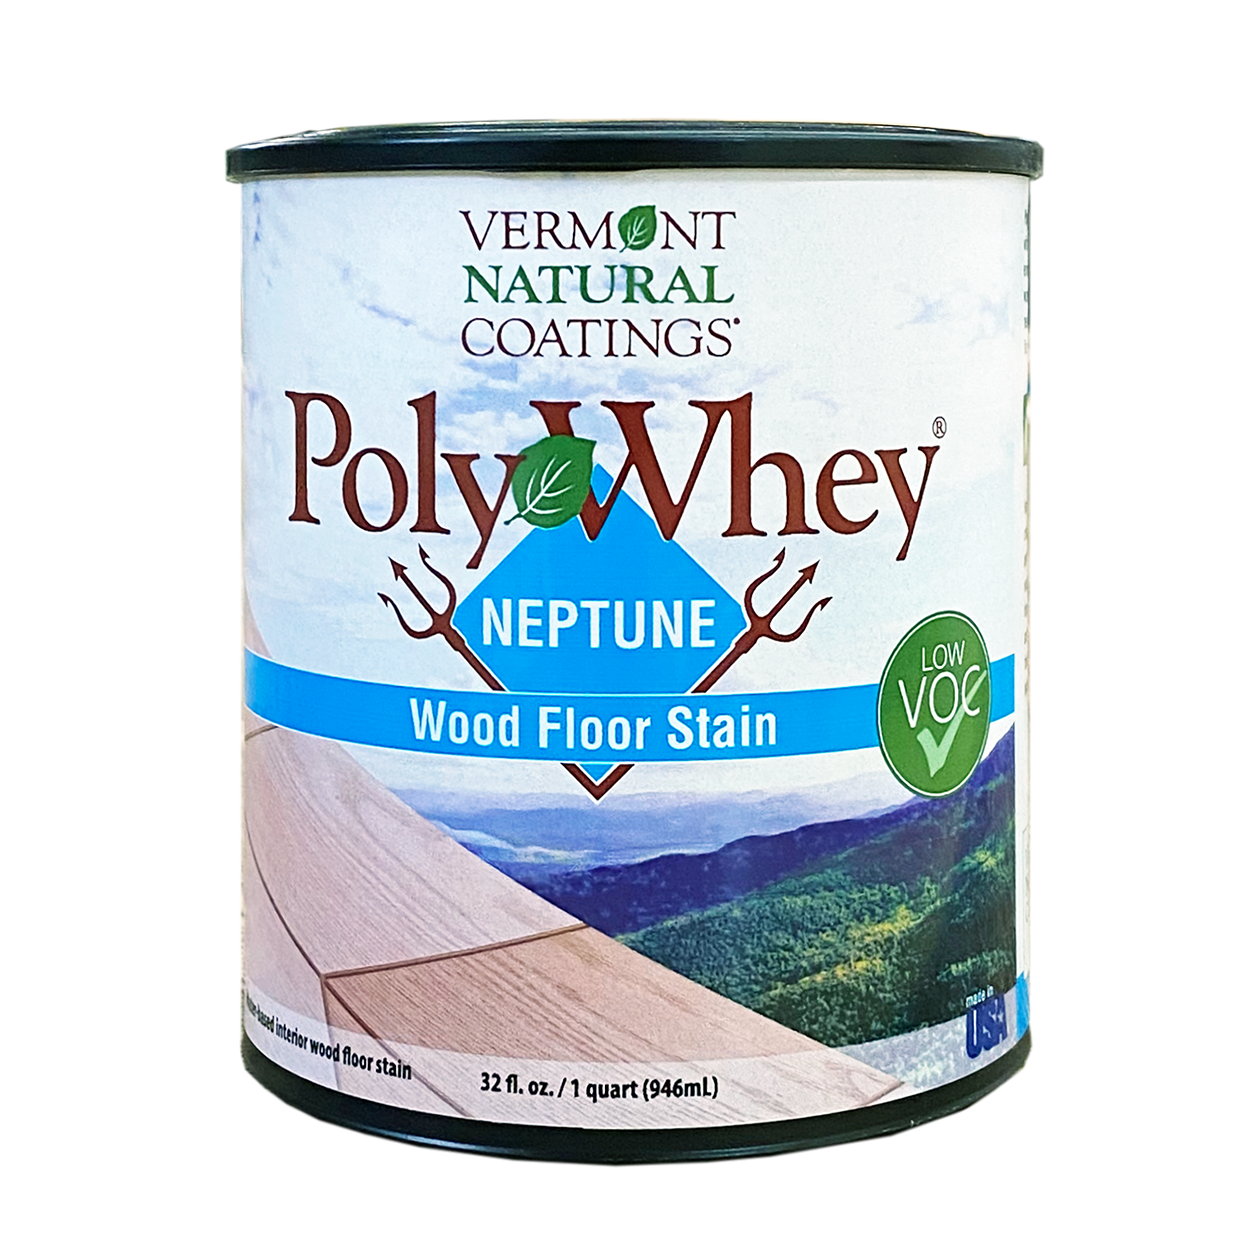 Neptune Wood Floor Stain with PolyWhey